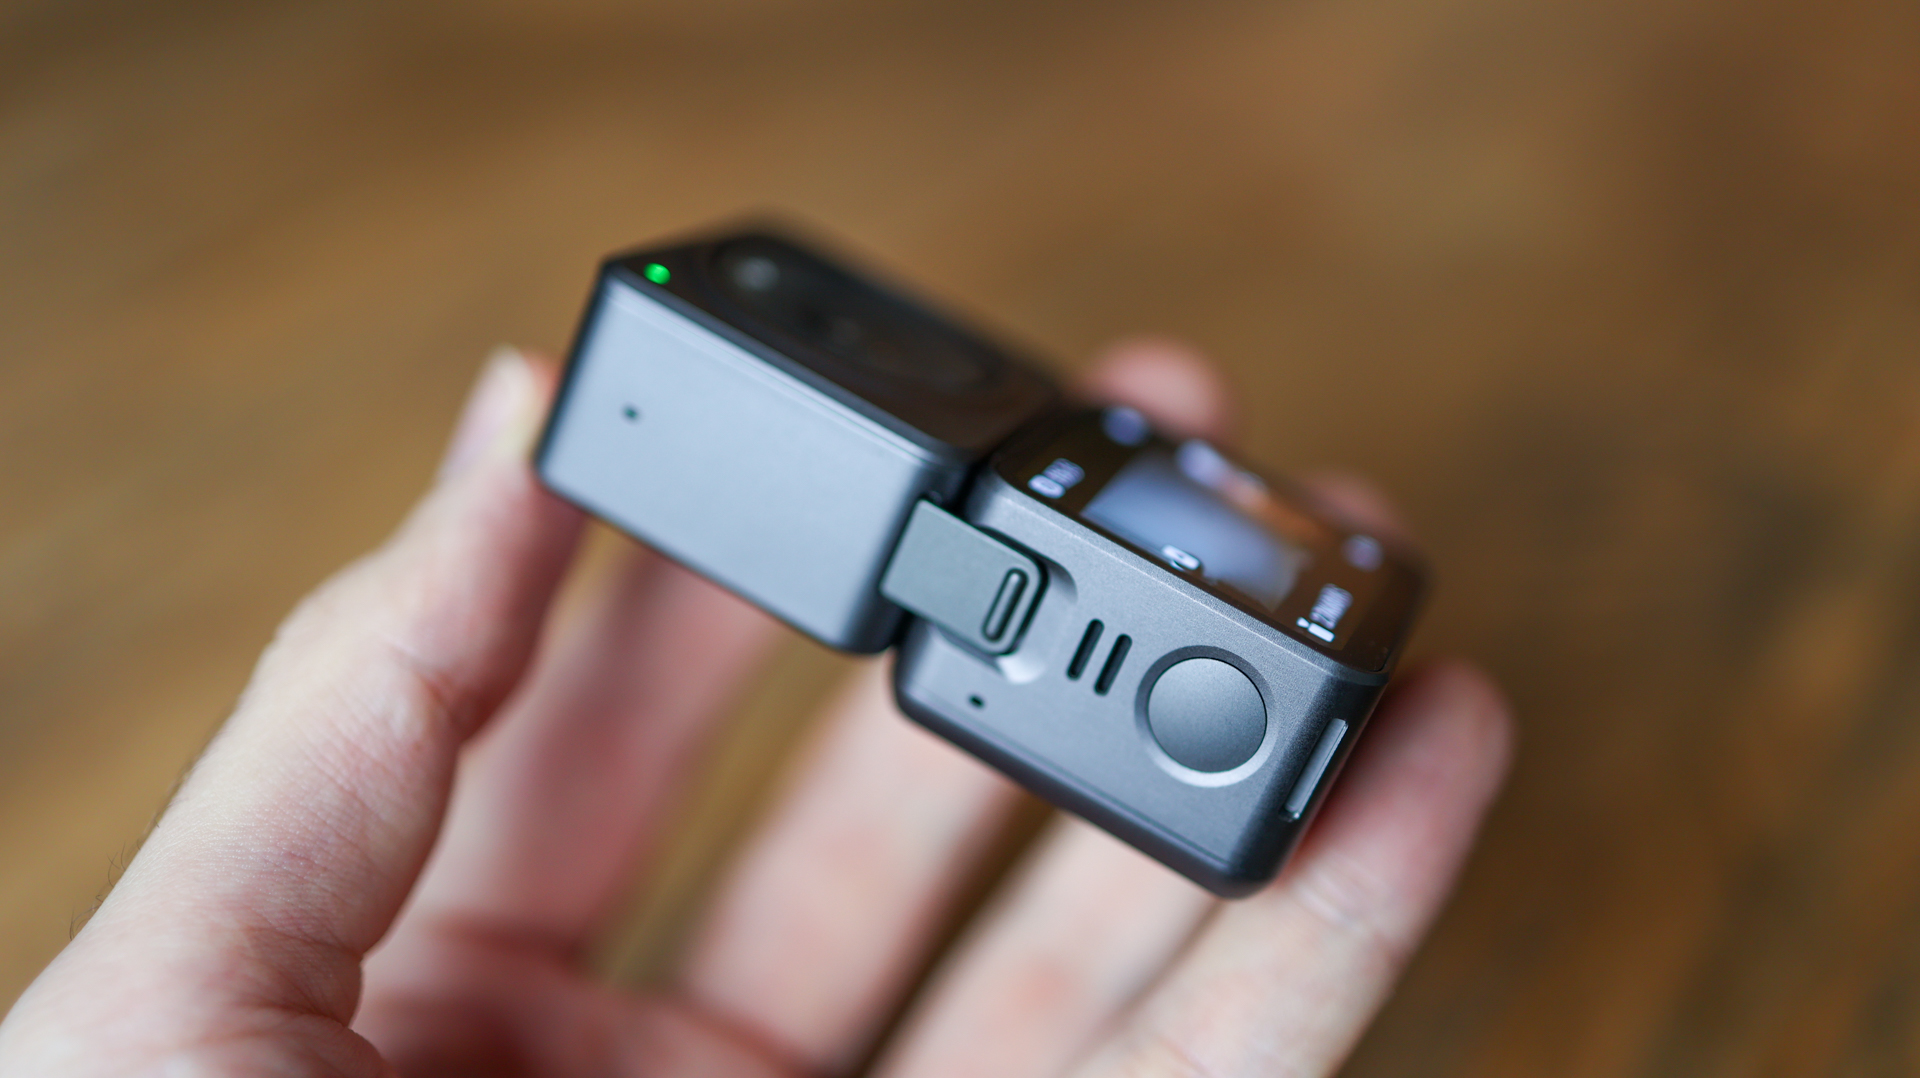 A hand holding the DJI Action 2 action camera and showing its hinge